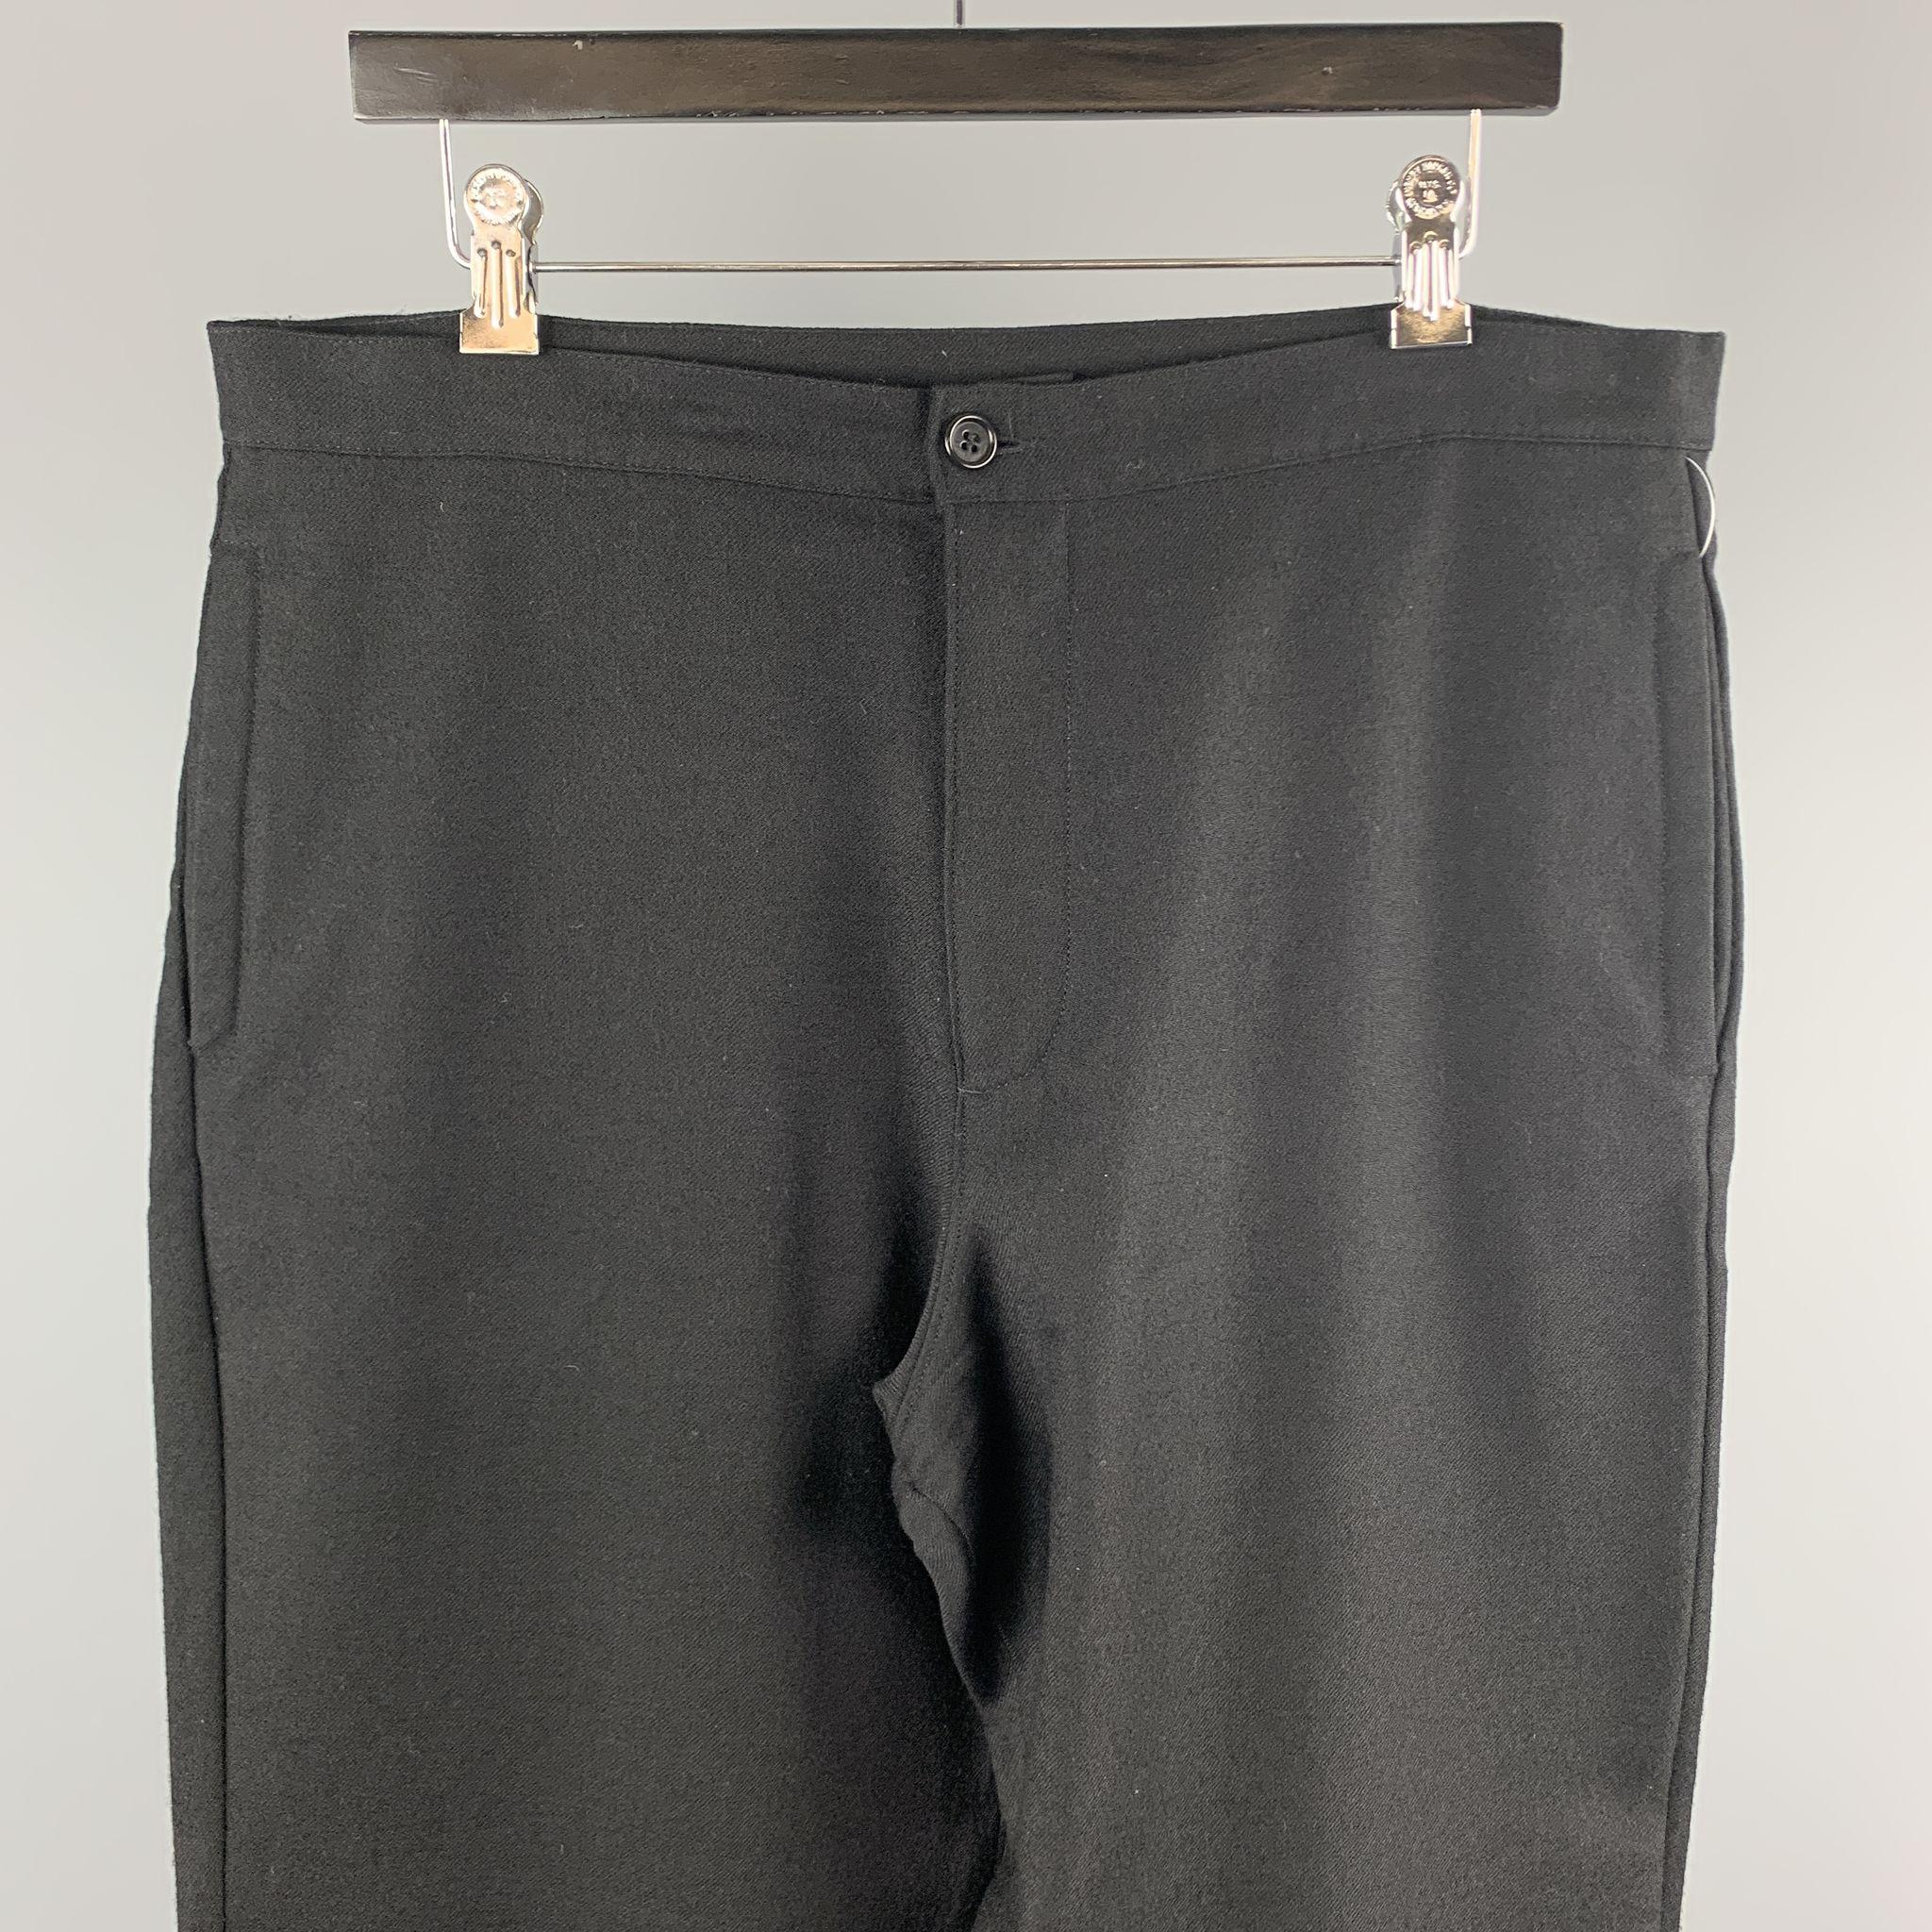 FAHRI casual pants comes in a black wool featuring a regular fit, back patch pocket, and a zip fly closure. Made in Portugal.

Excellent Pre-Owned Condition.
Marked: 34

Measurements:

Waist: 36 in. 
Rise: 13 in.
Inseam: 33 in. 

SKU: